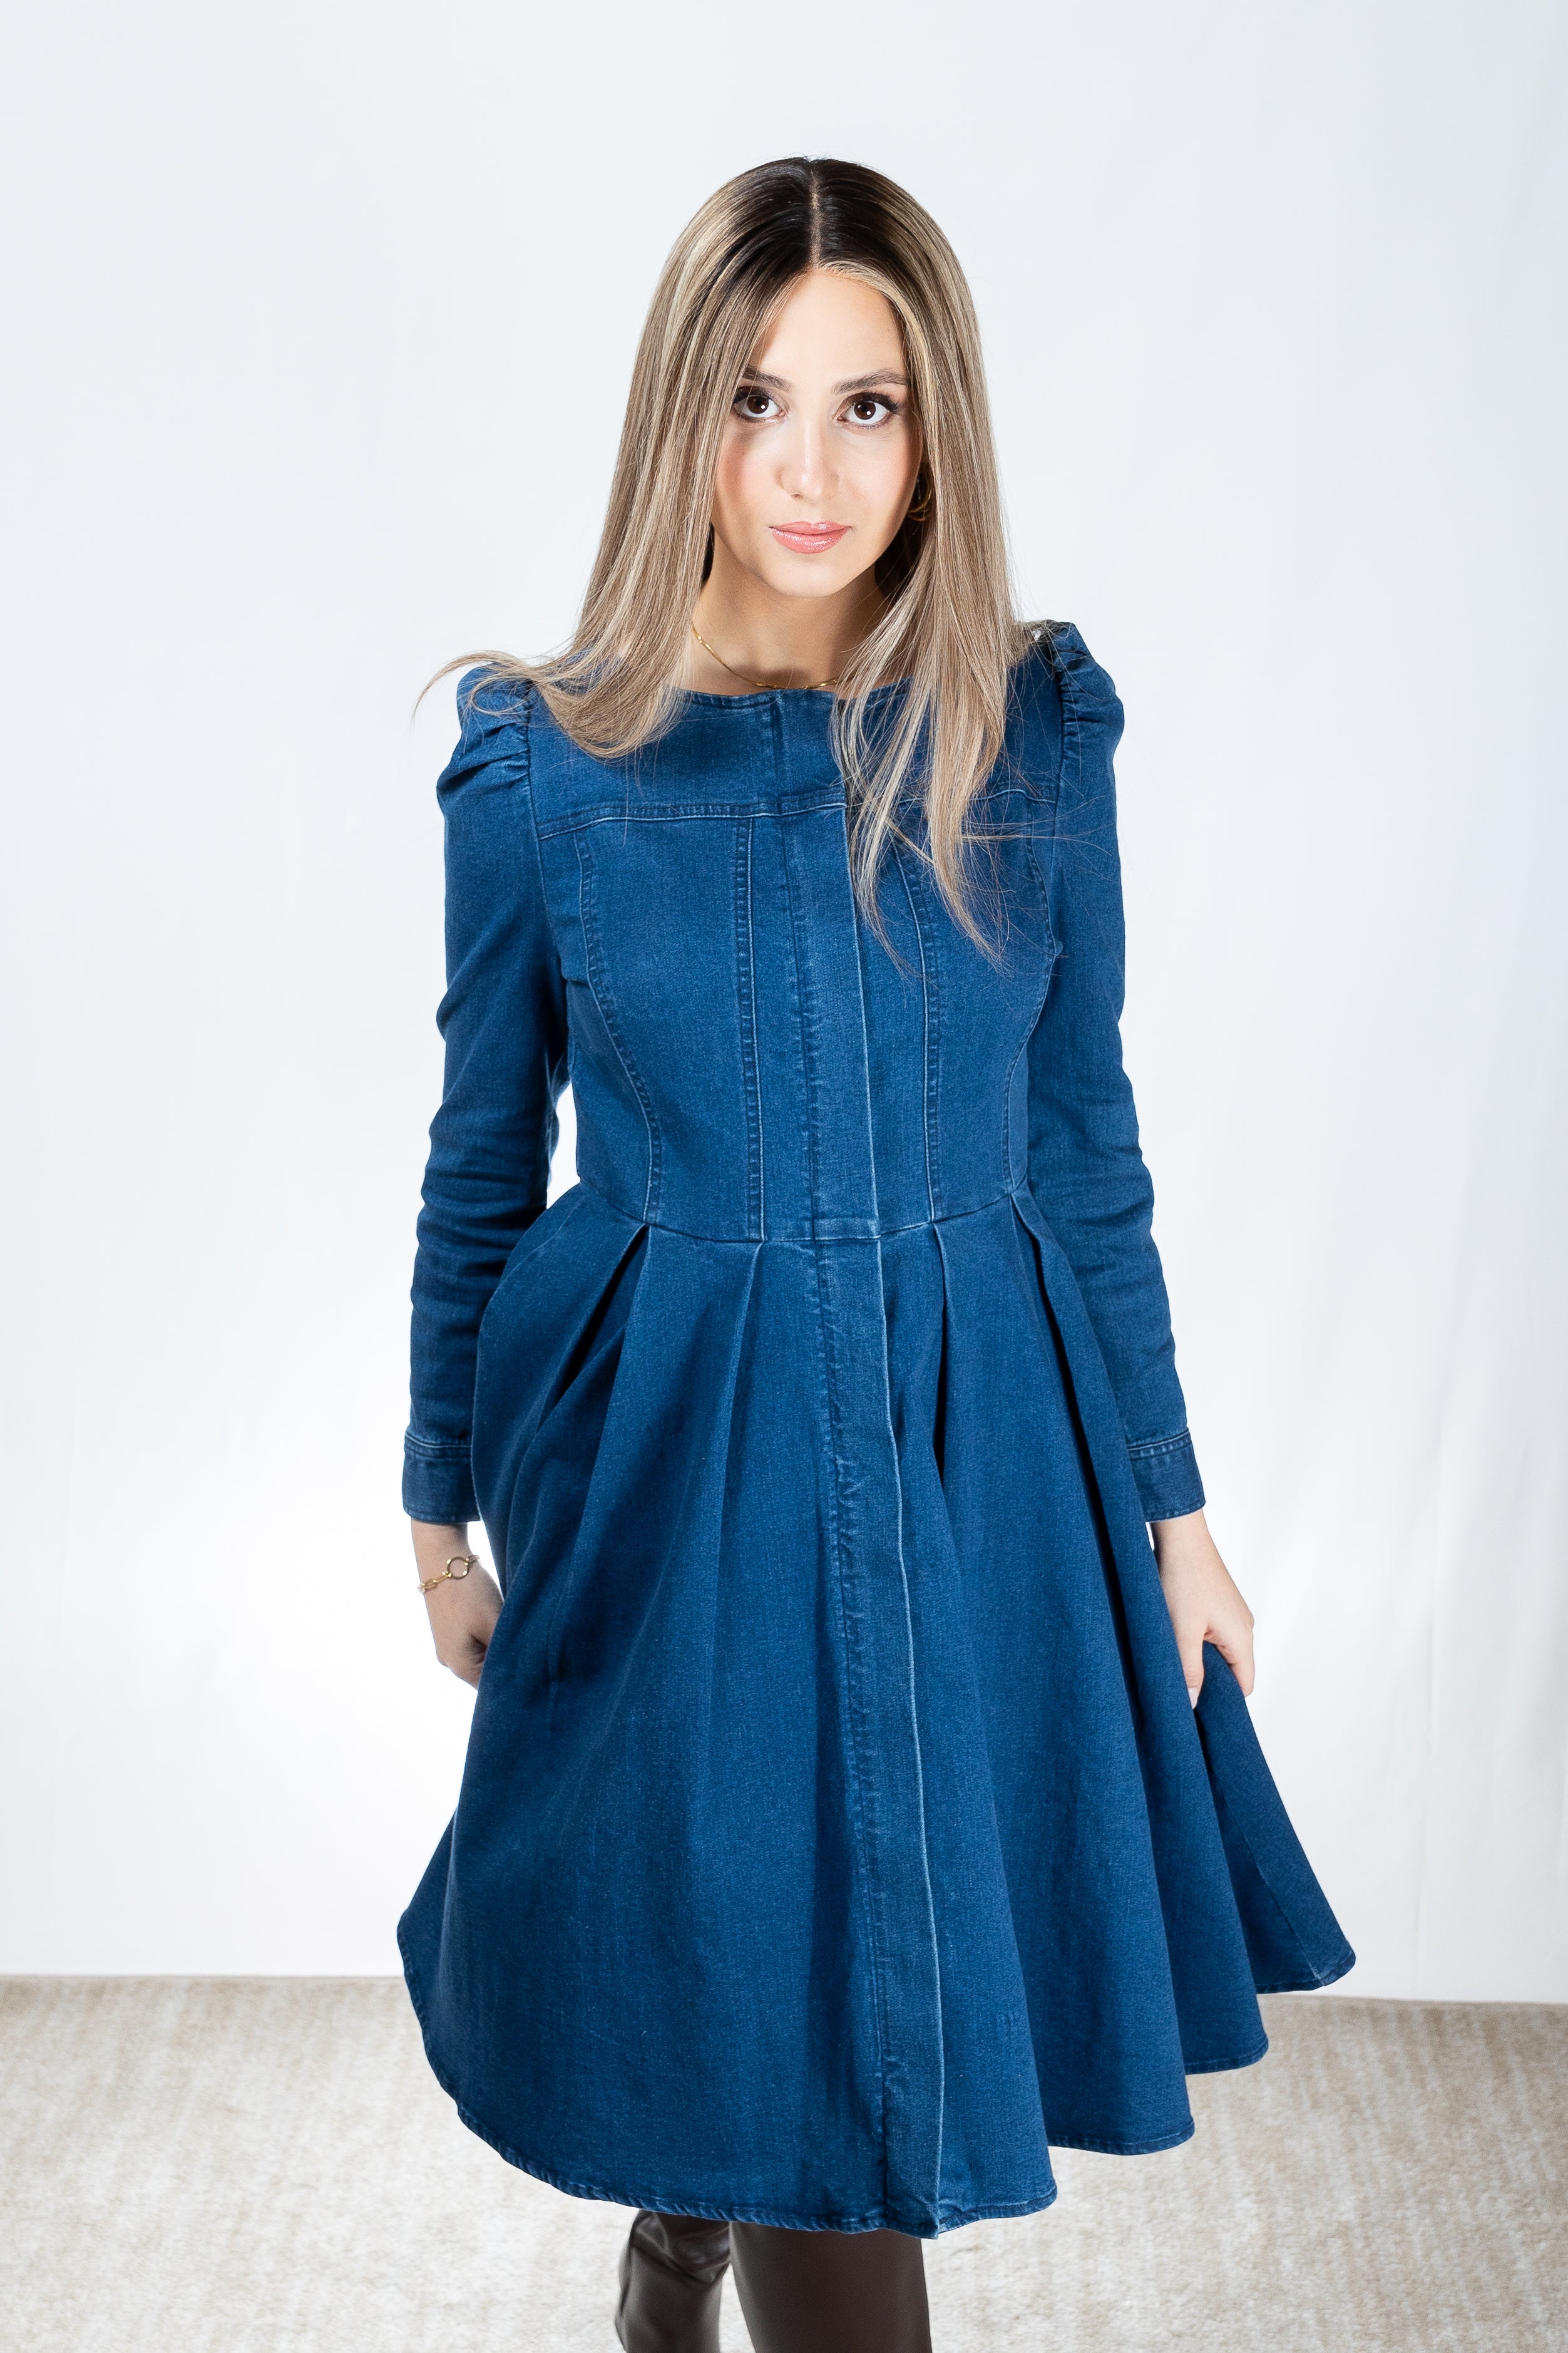 Buy Nuon by Westside Black Button Down Denim Dress for Online @ Tata CLiQ